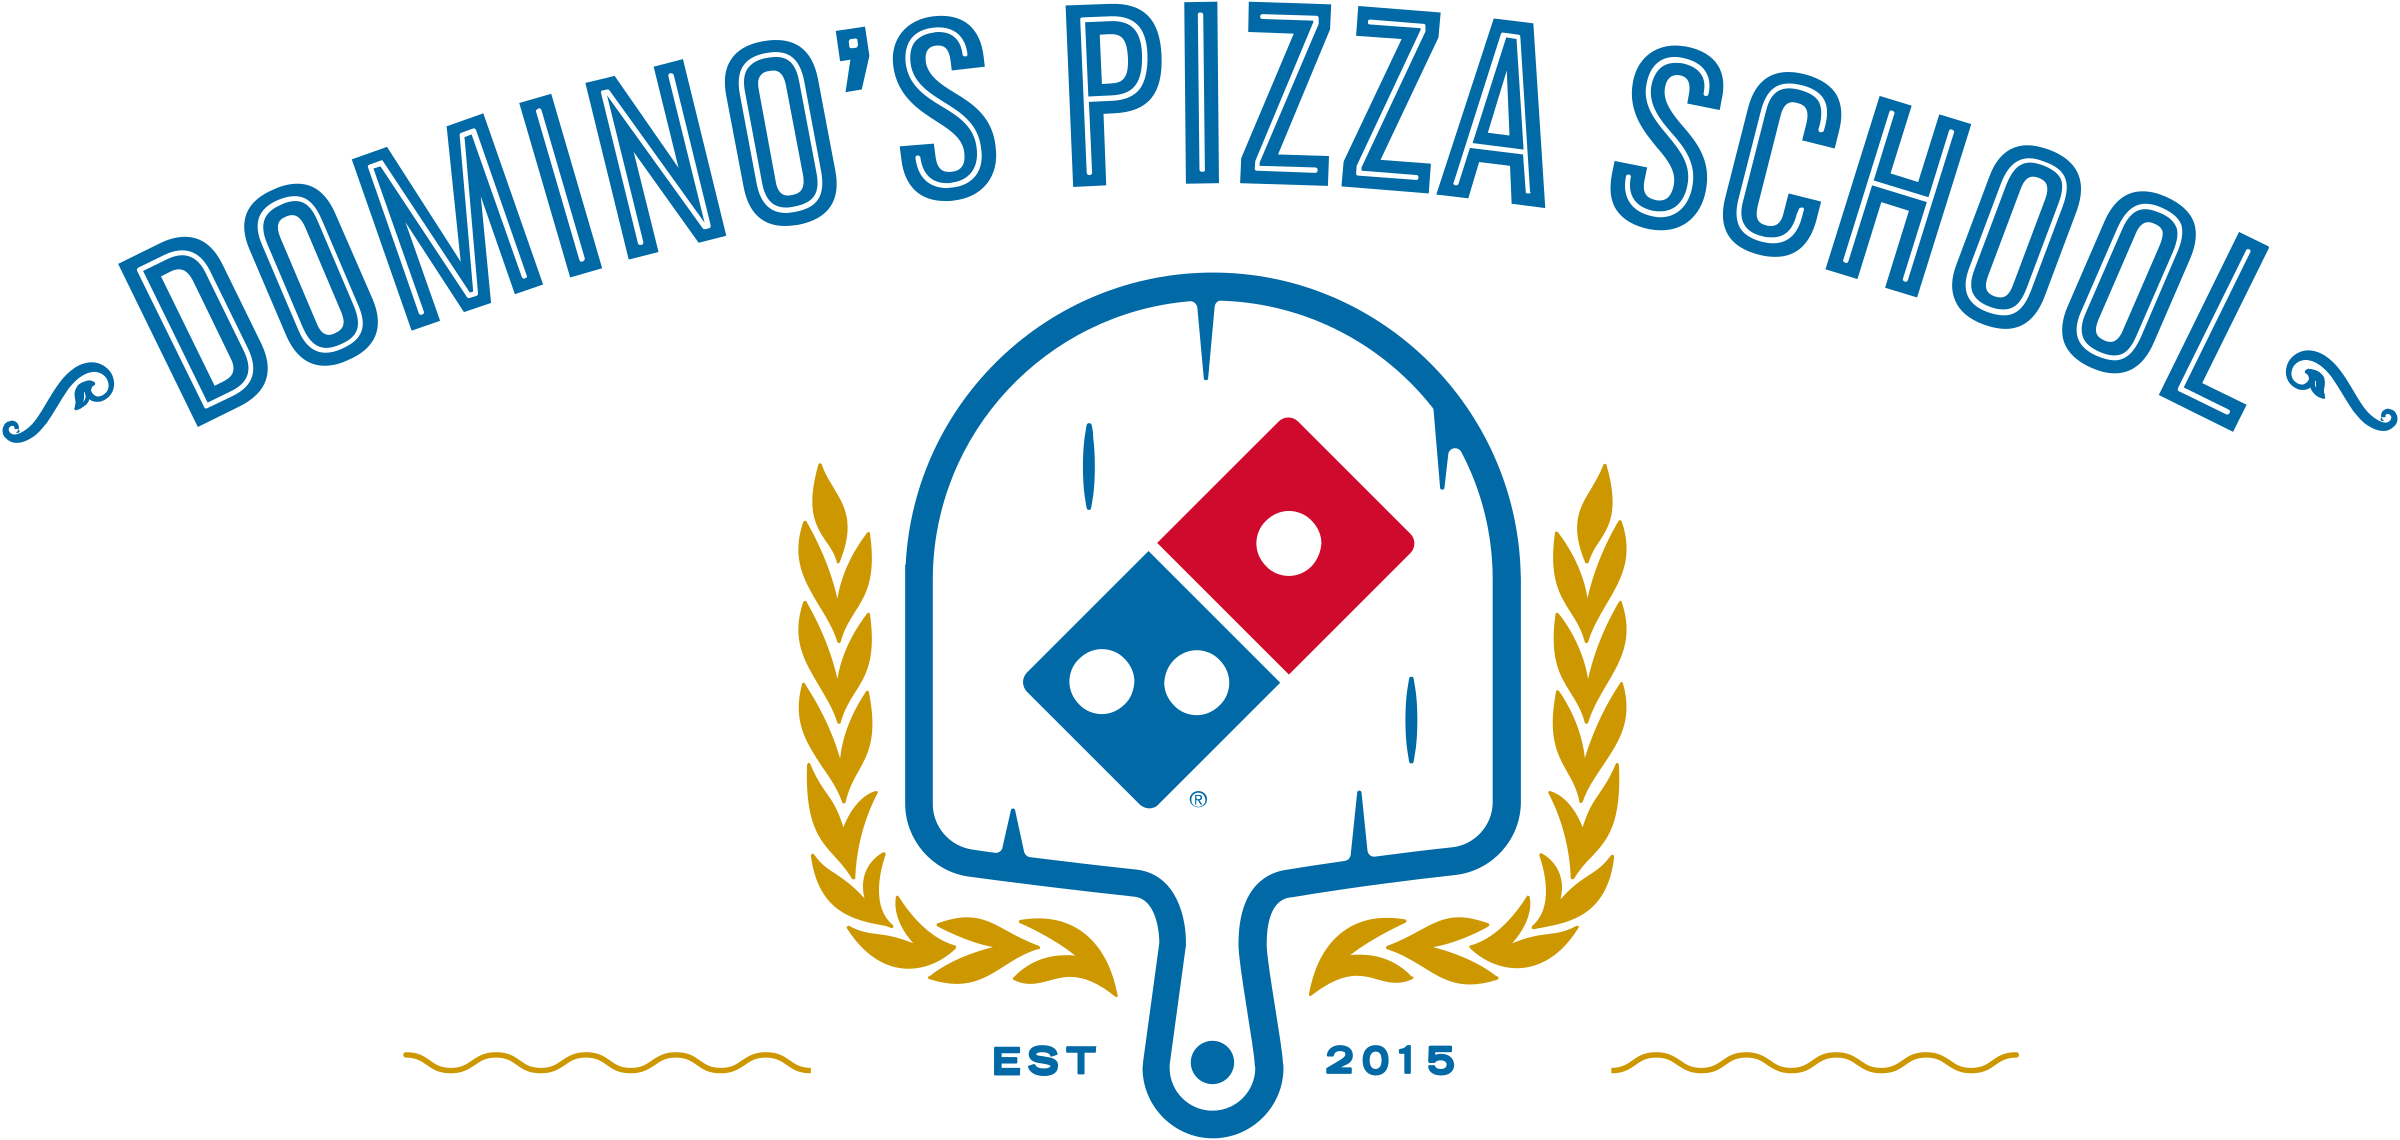 Promos Pizza icon PNG HD Качество